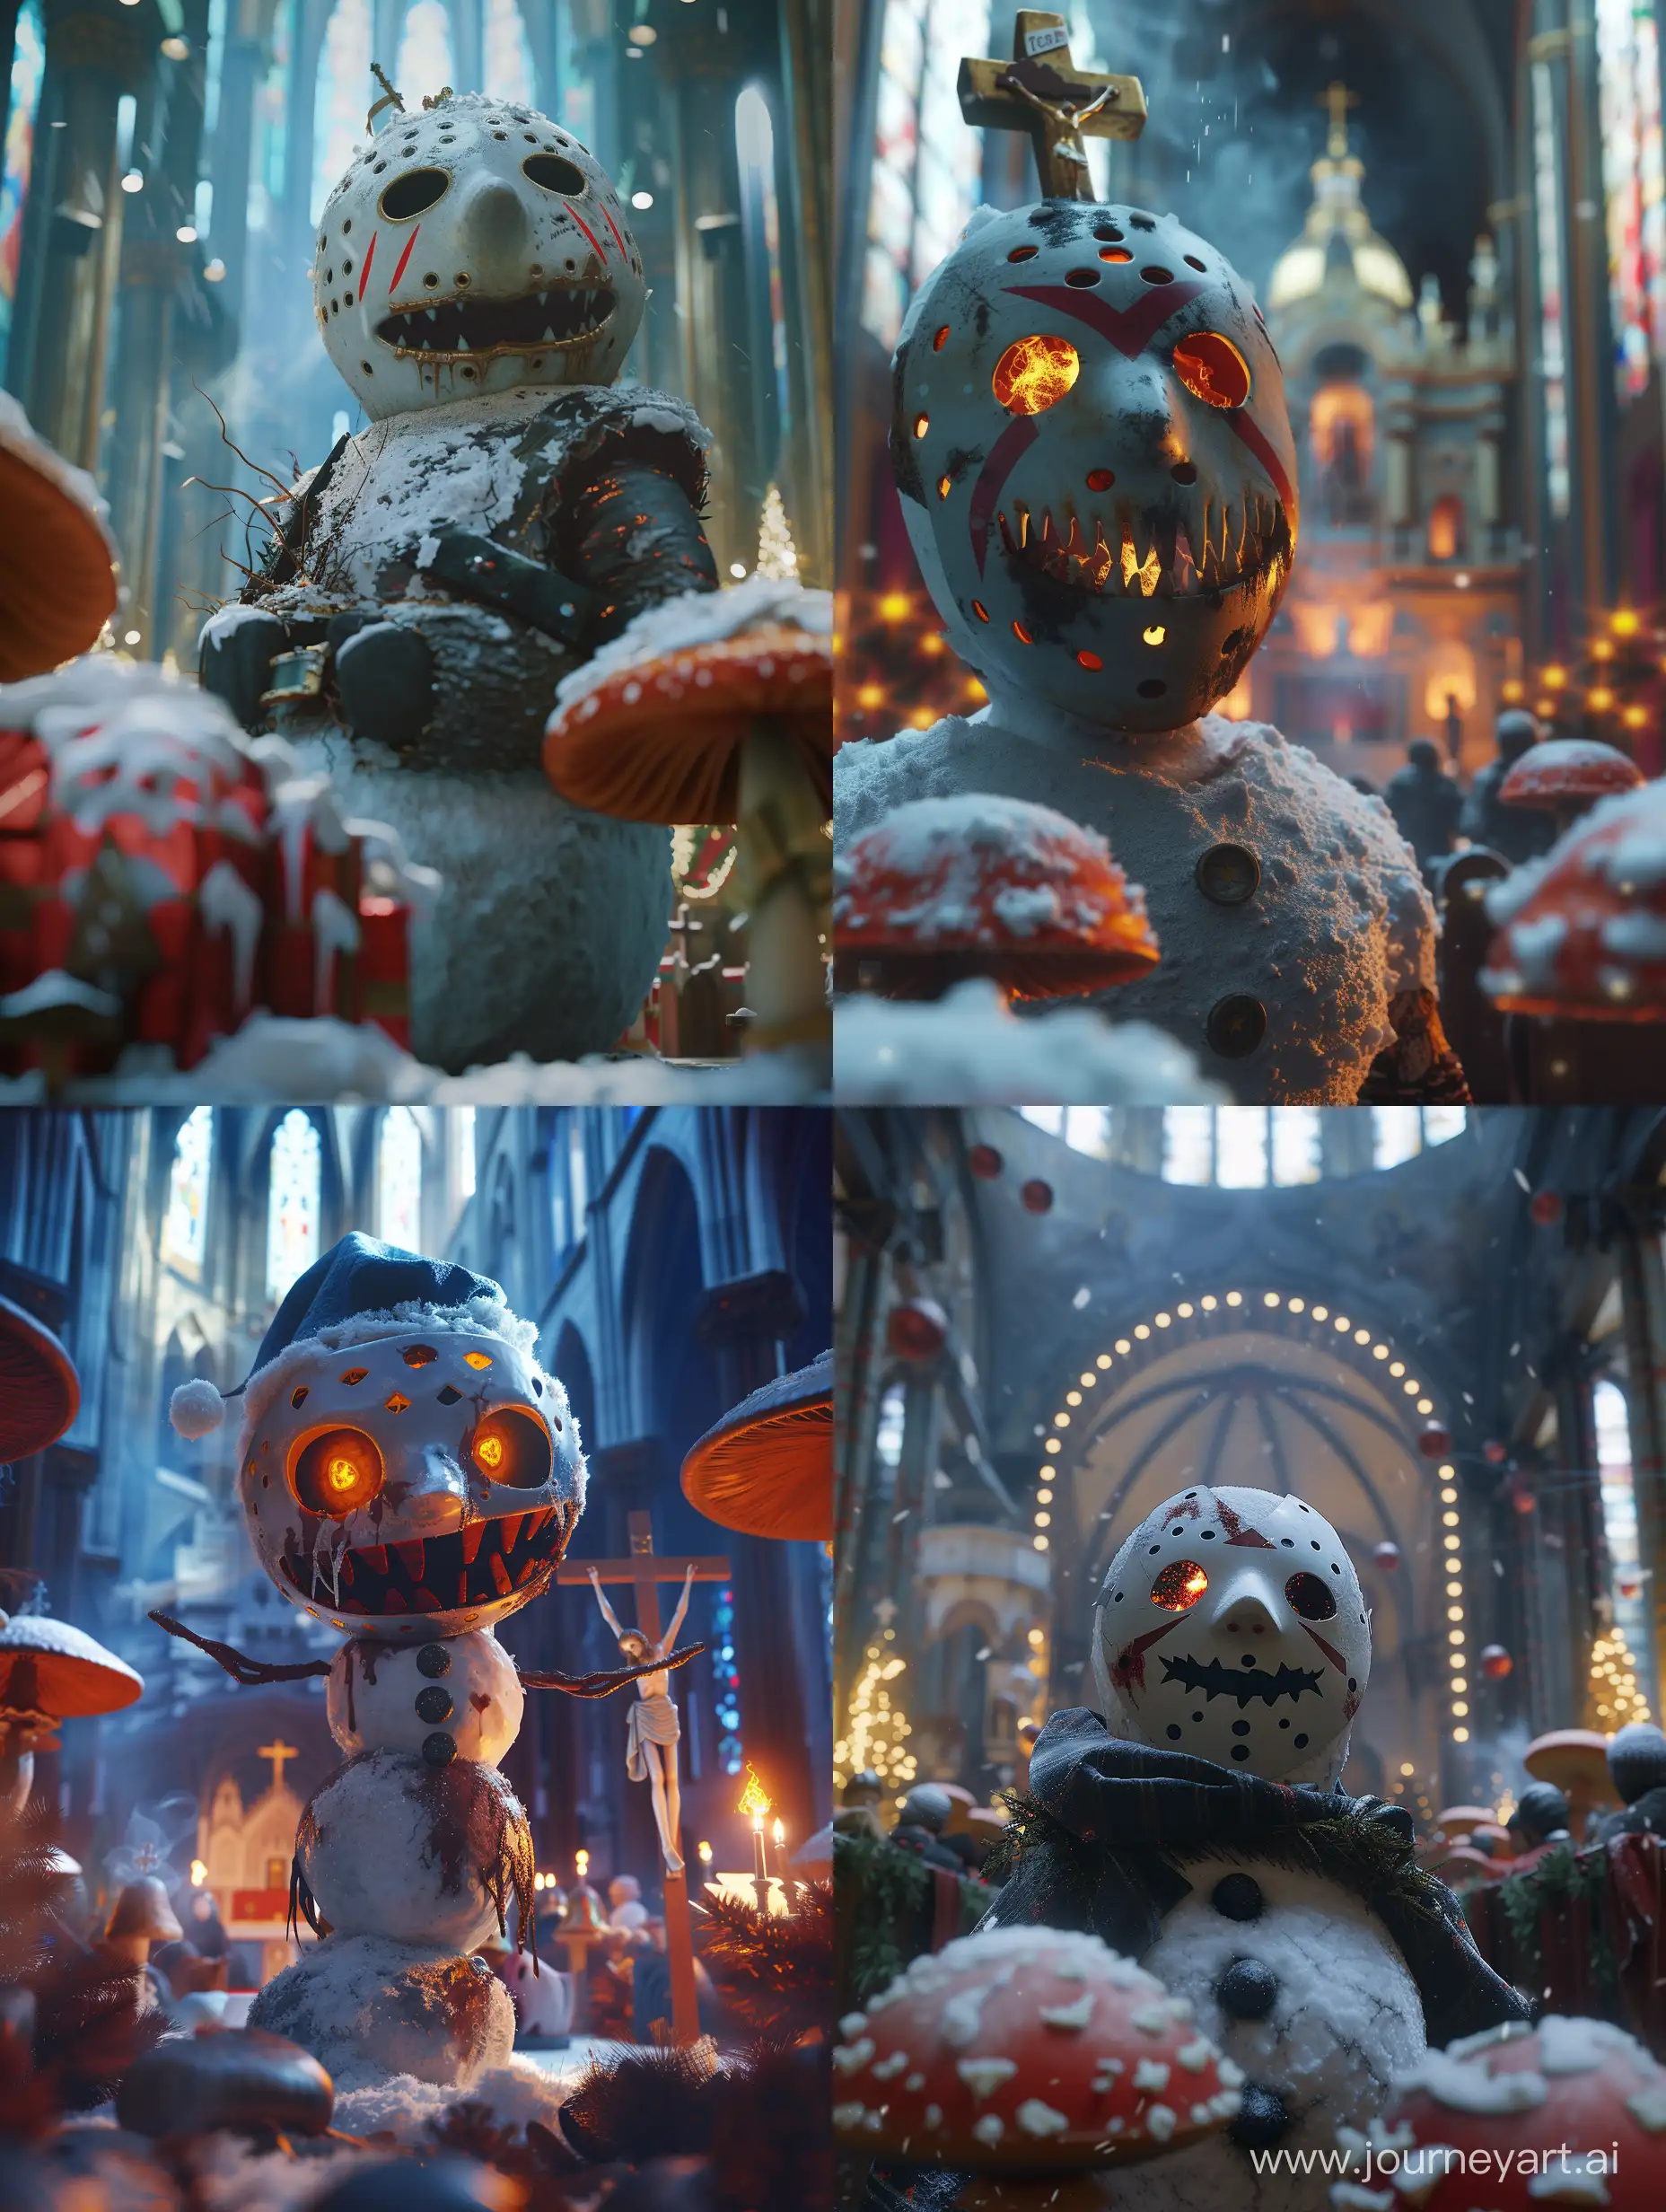 Sinister-Snowman-Surreal-Christmas-Cathedral-Scene-with-Anime-Style